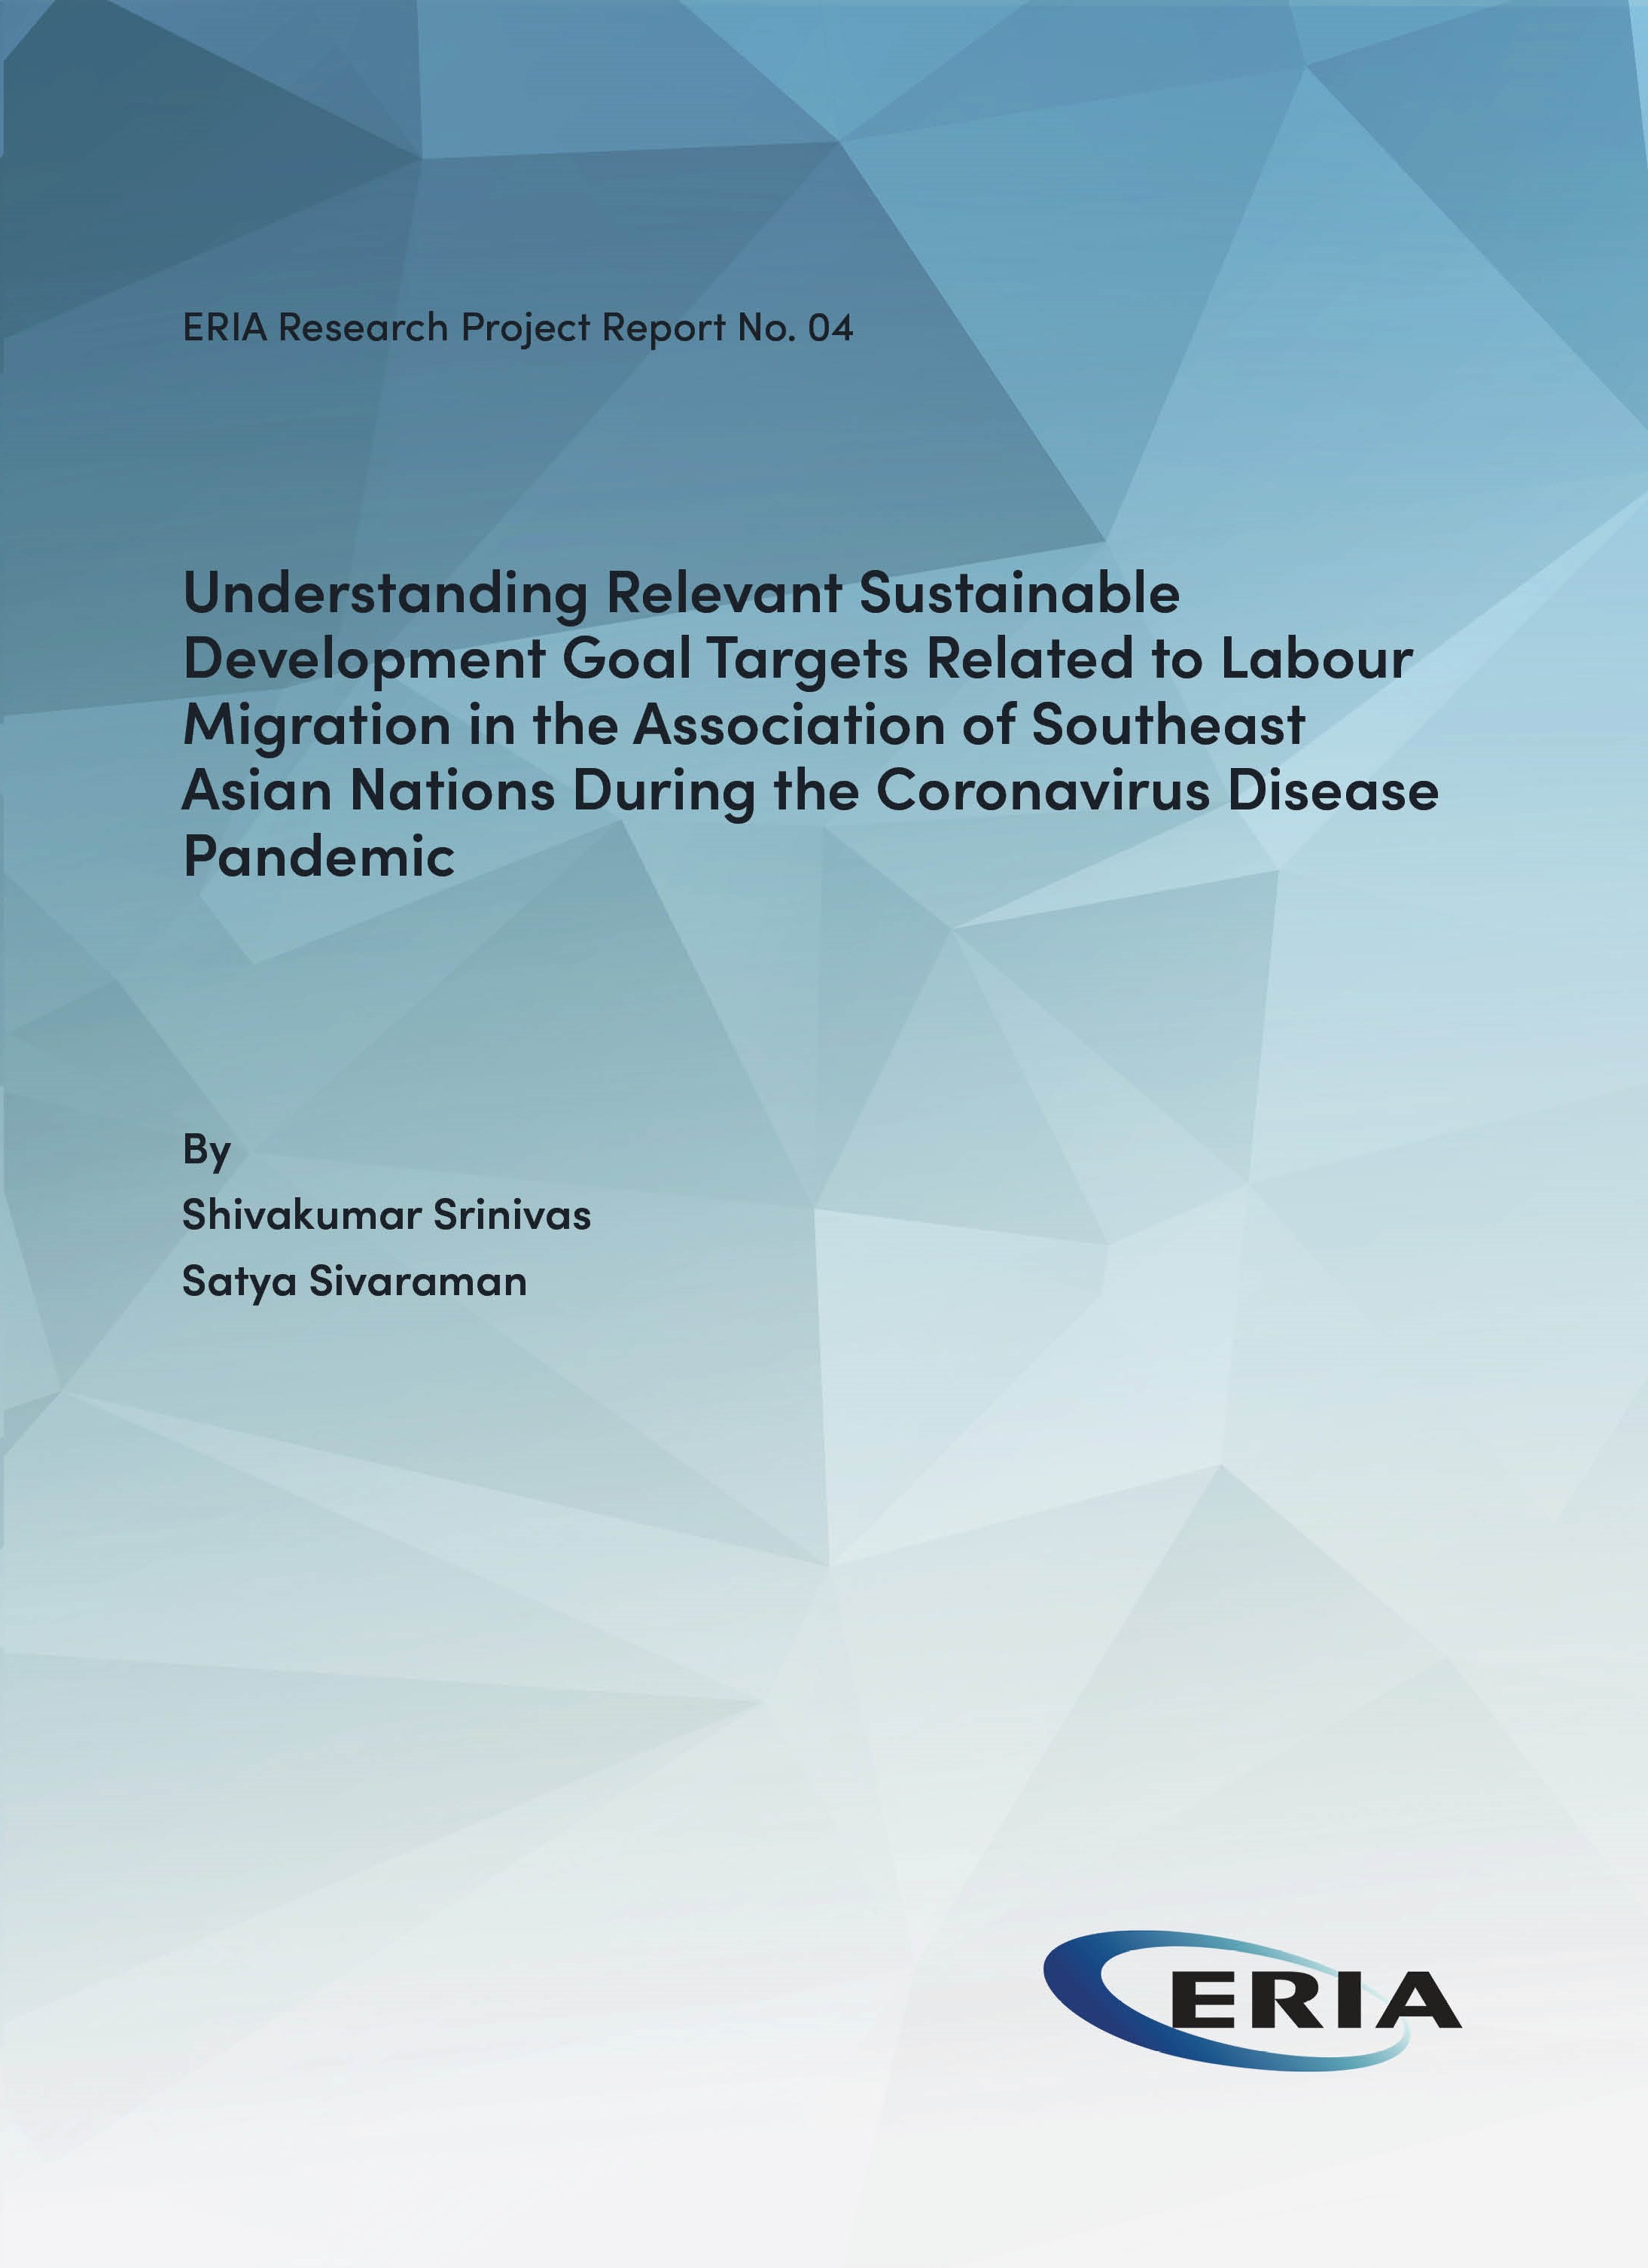 Understanding Relevant Sustainable Development Goal Targets Related to Labour Migration in the Association of Southeast Asian Nations During the Coronavirus Disease Pandemic